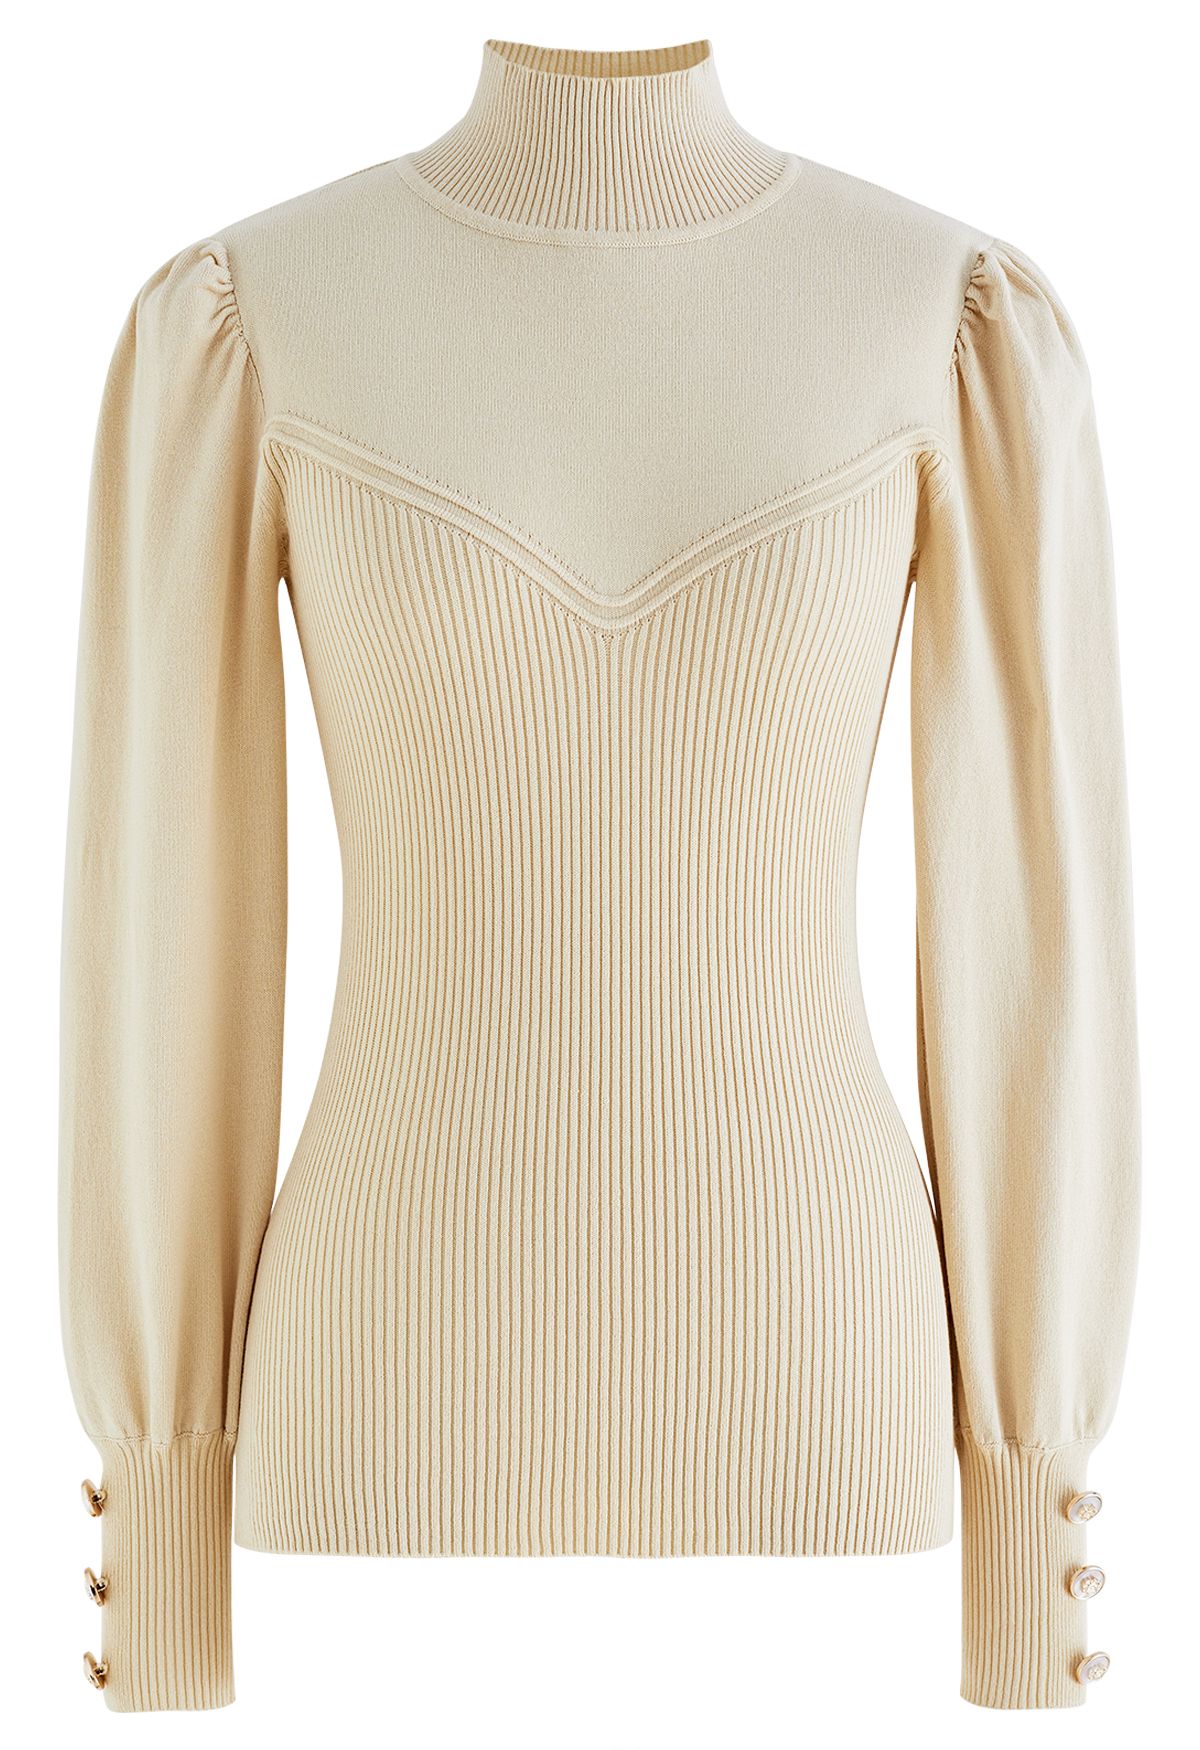 Rib Splicing Fitted Soft Knit Sweater in Cream